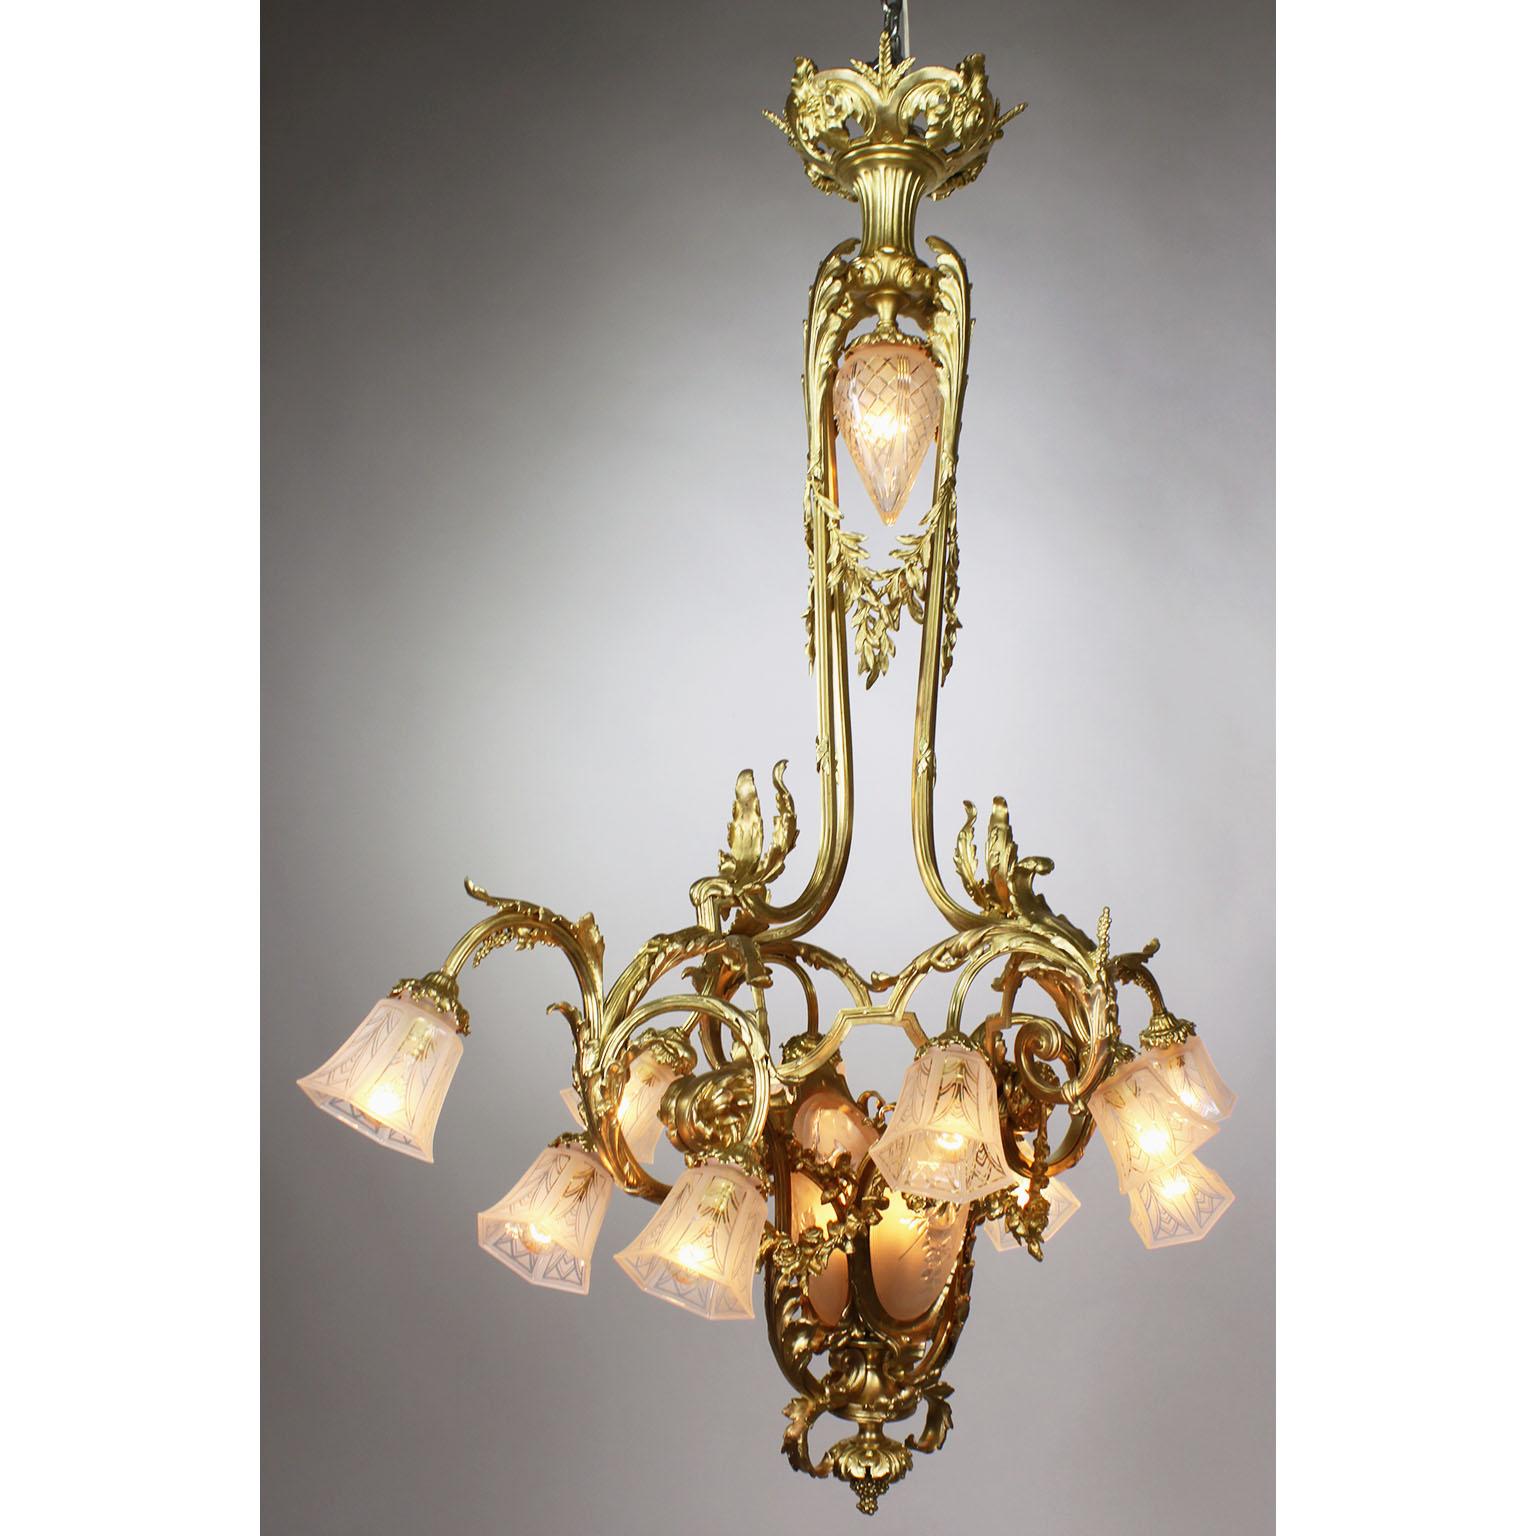 A fine and large French Belle Époque gilt-bronze and molded glass fifteen-light 